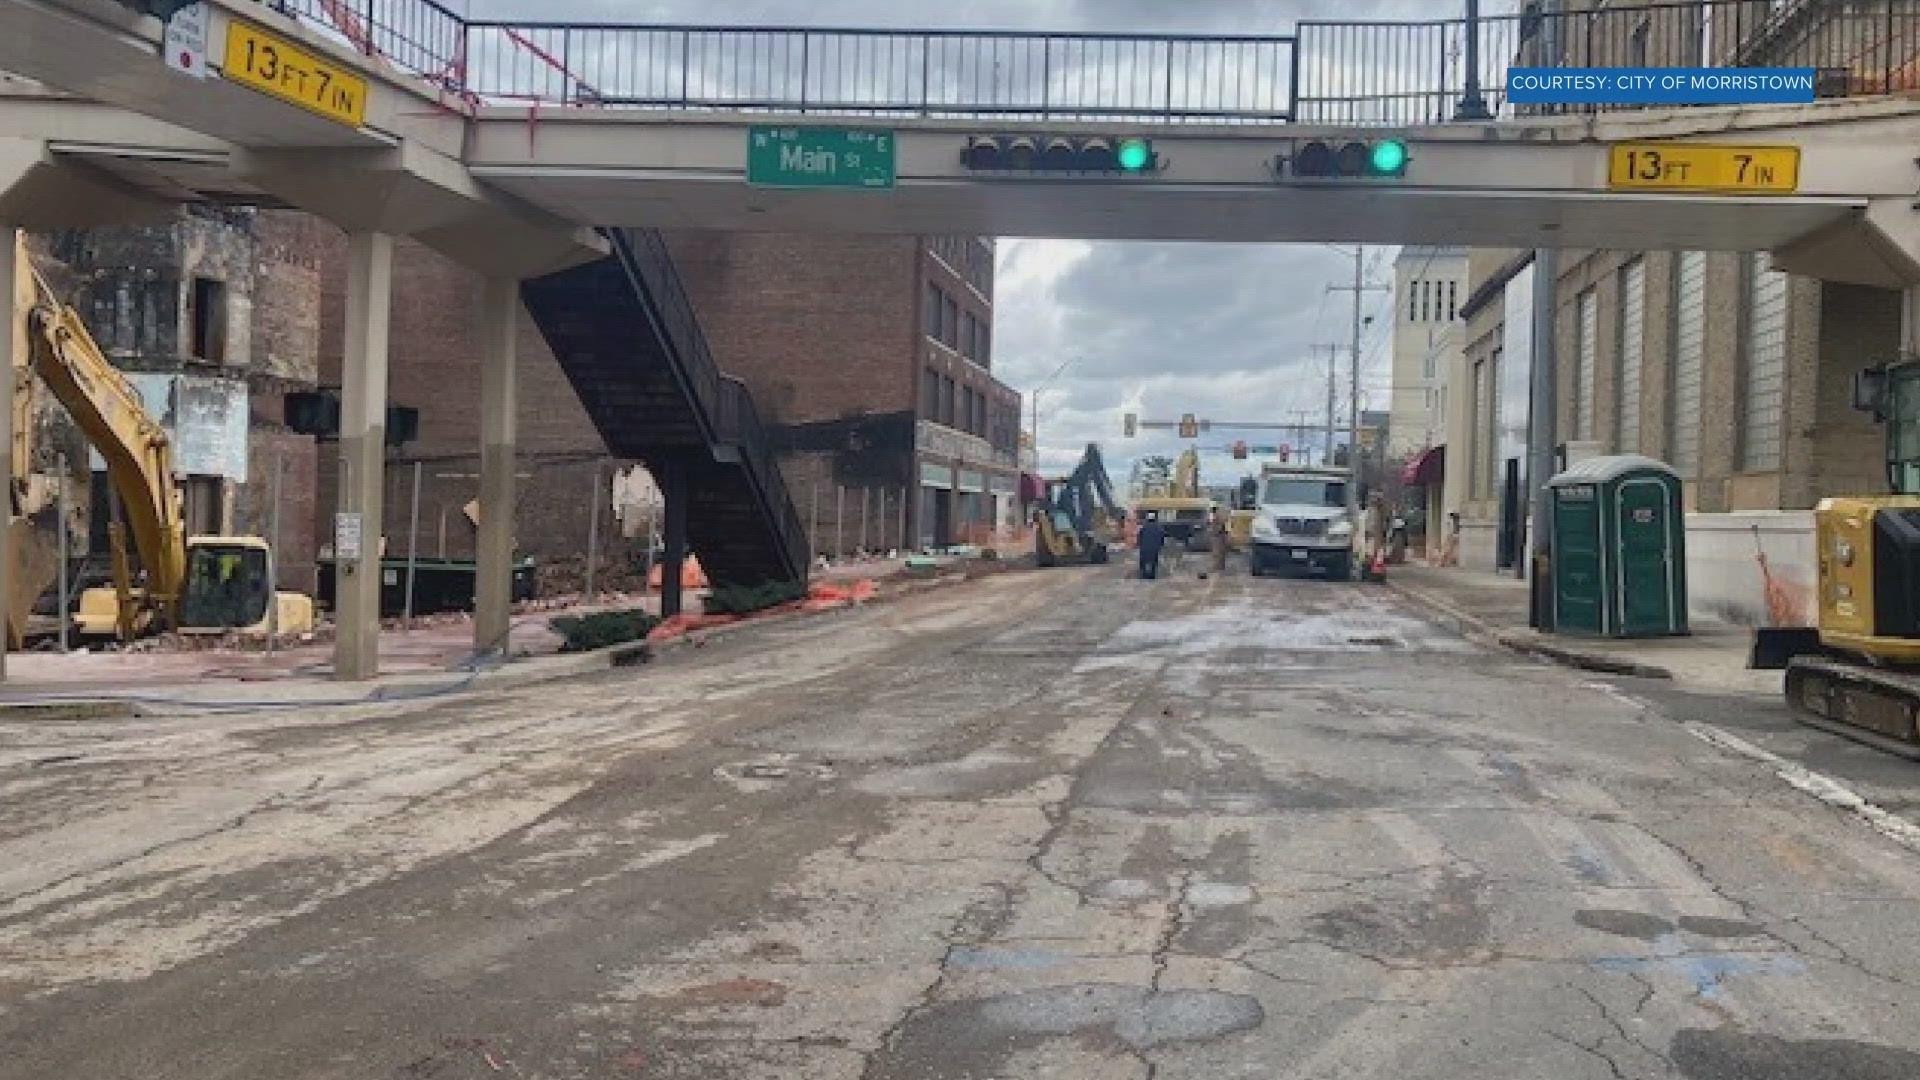 City officials said once road work is finished, the roads will reopen.